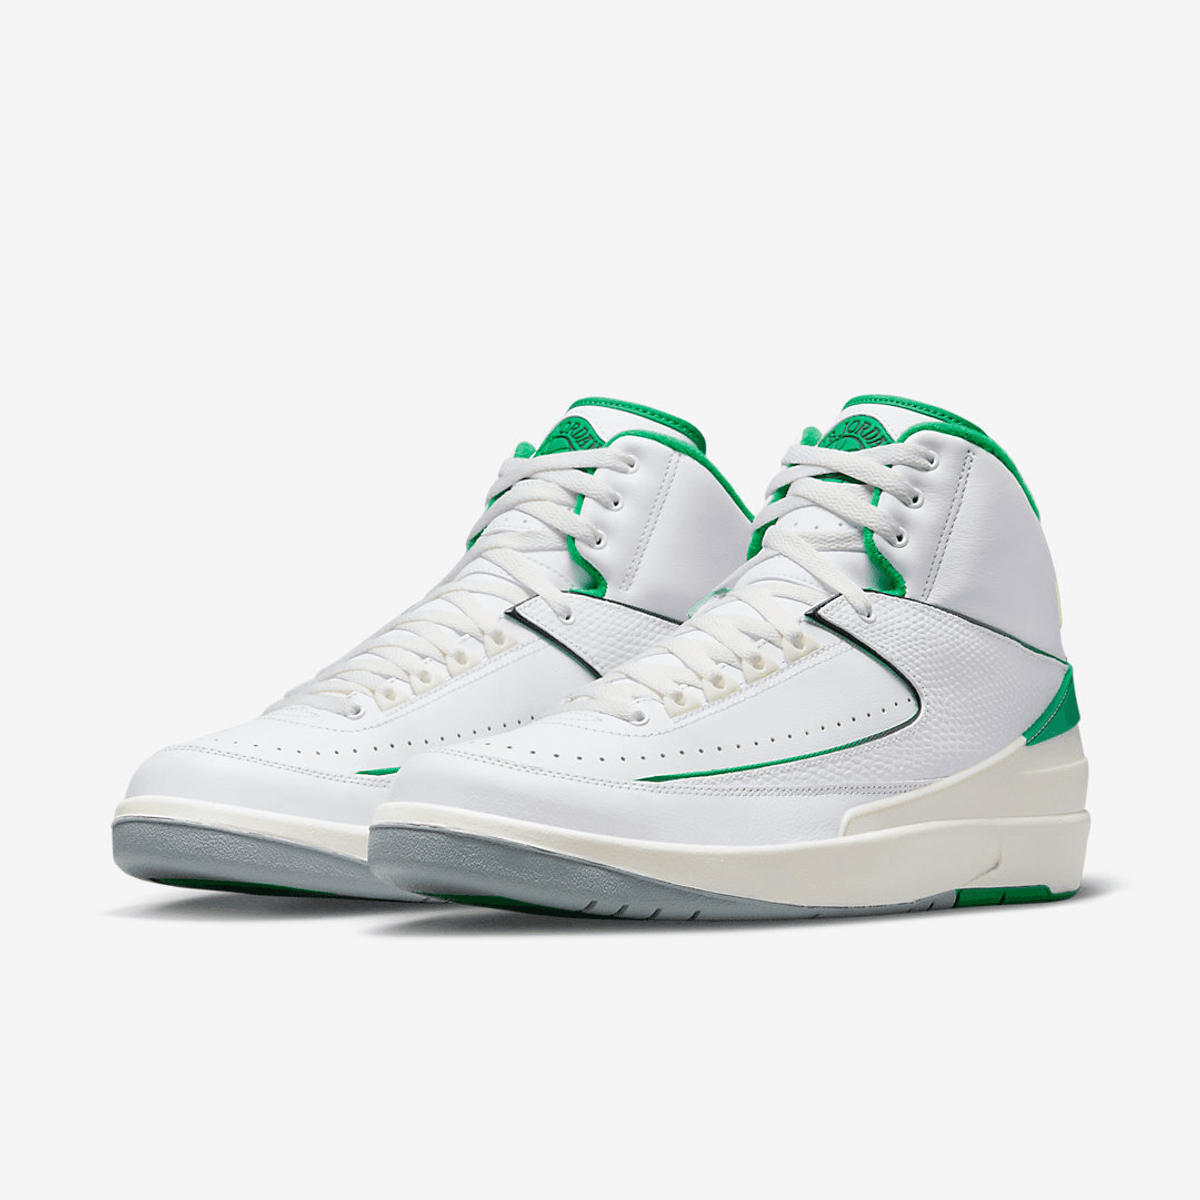 Official Images Of The Air Jordan 2 Lucky Green